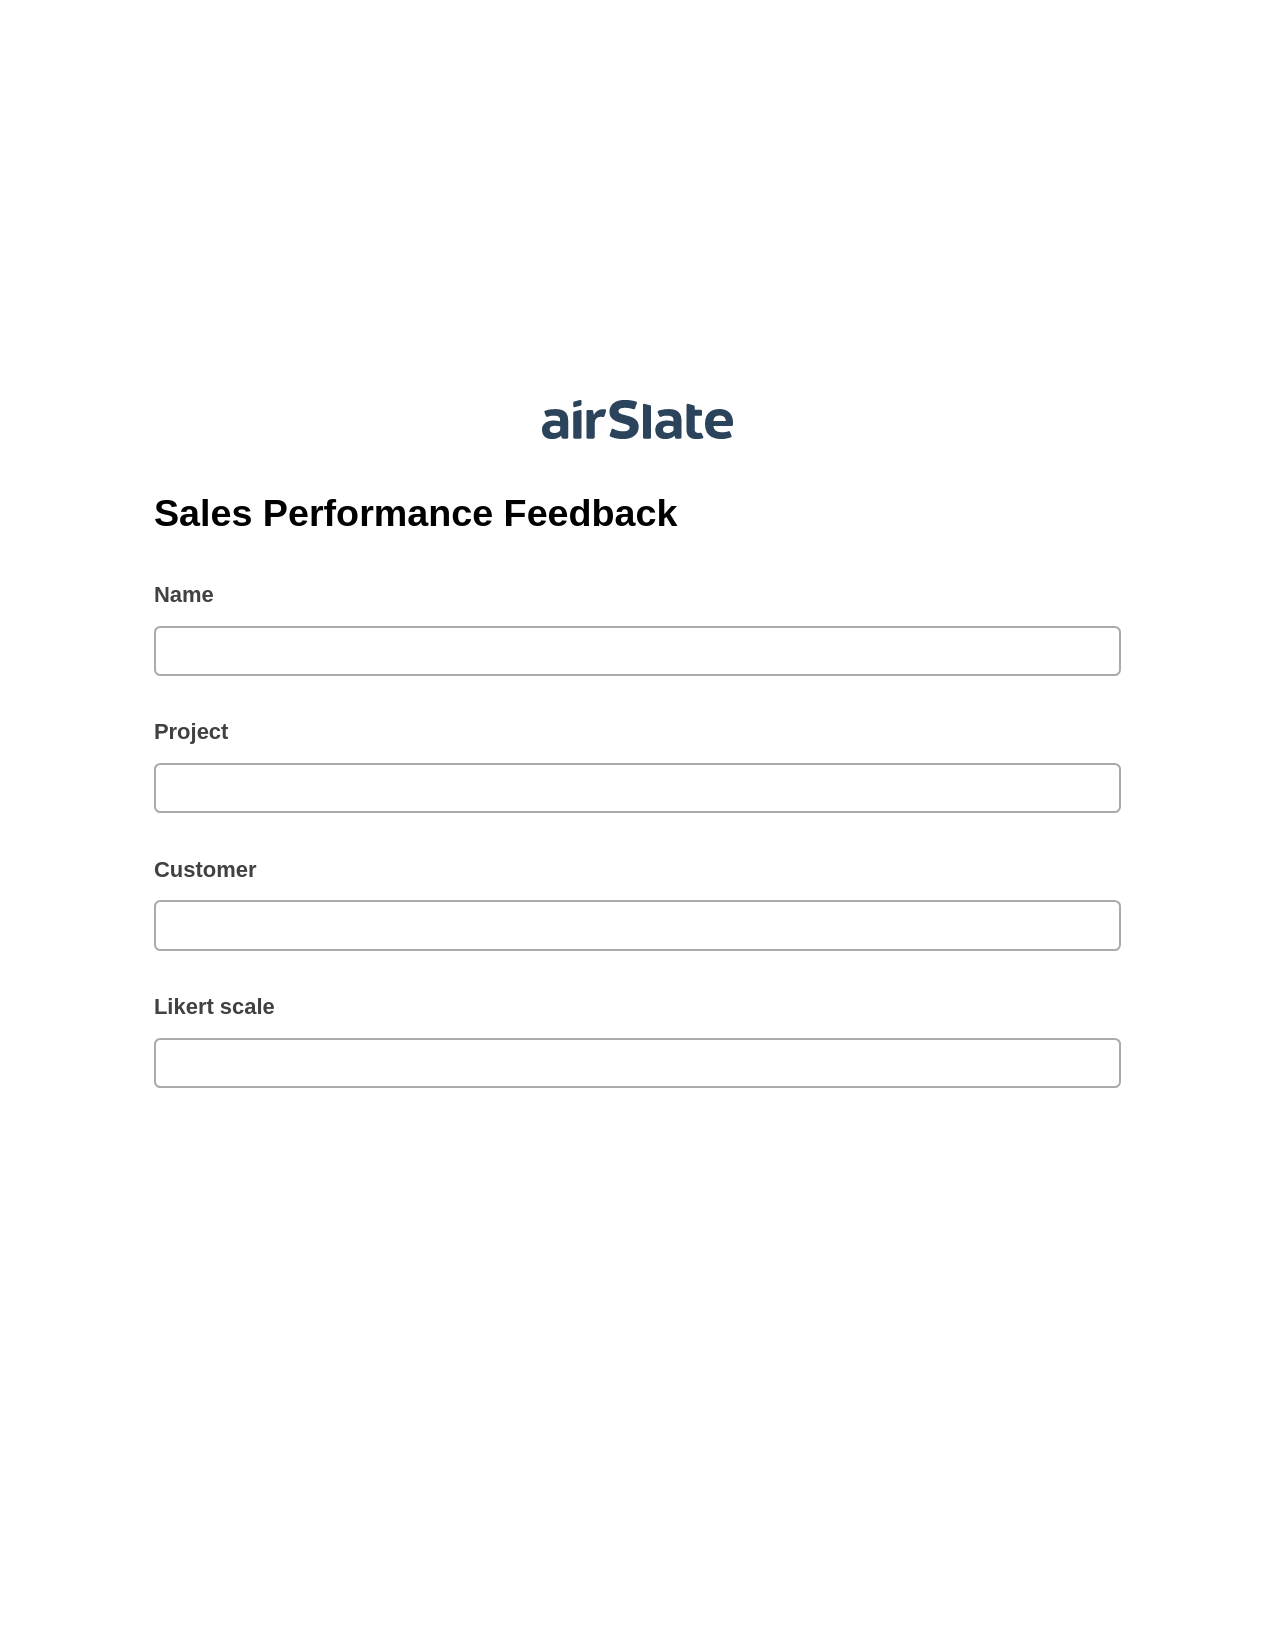 Sales Performance Feedback Pre-fill from CSV File Bot, Send a Slate to Salesforce Contact Bot, Export to NetSuite Record Bot